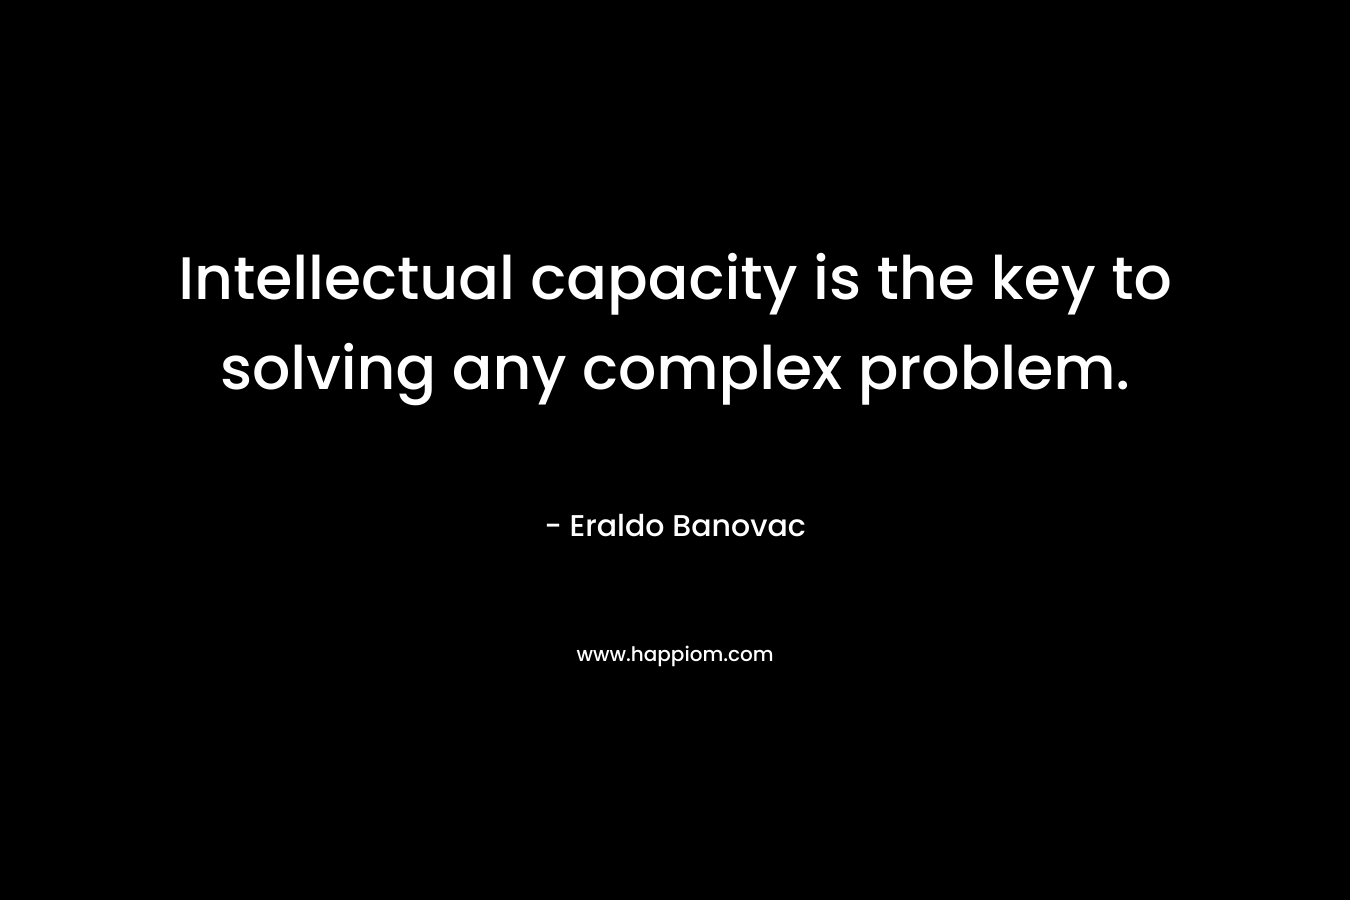 Intellectual capacity is the key to solving any complex problem. – Eraldo Banovac